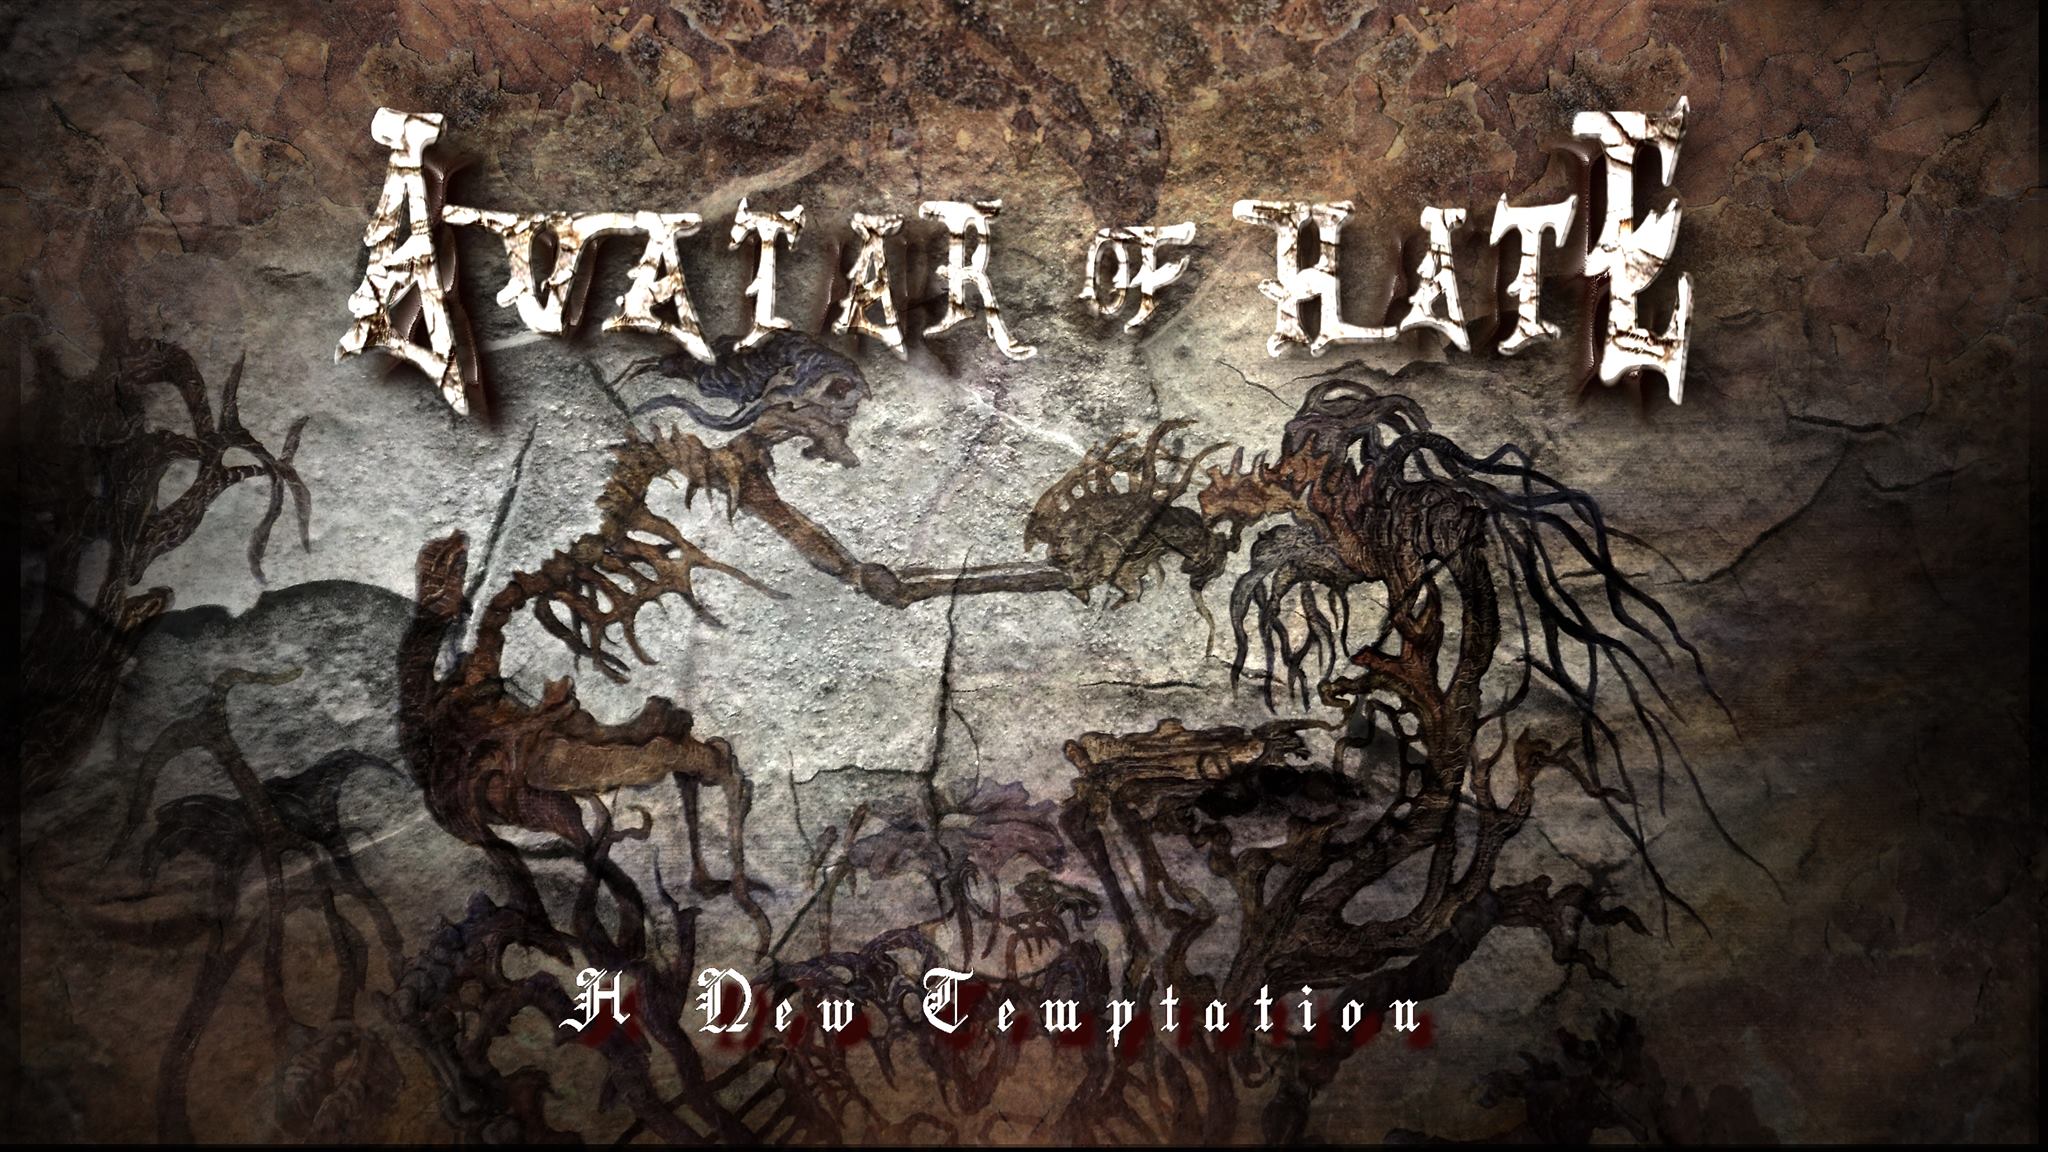 Avatar of Hate new video